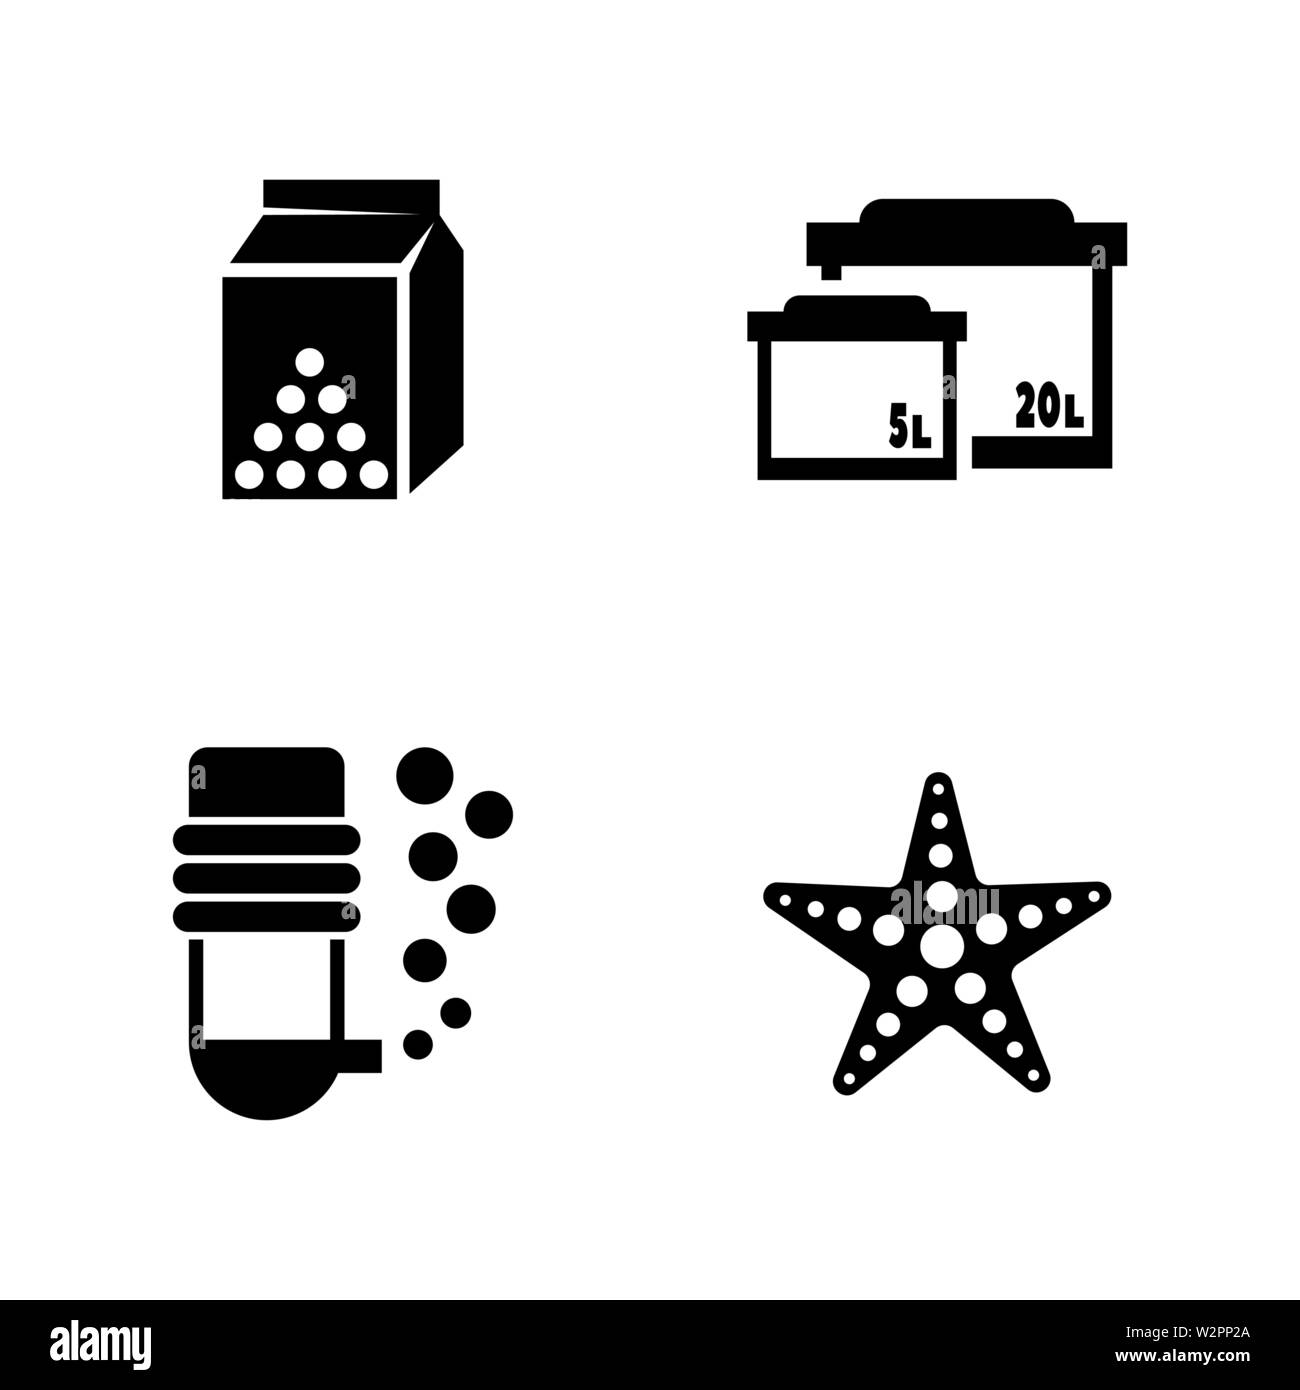 Aquarium. Simple Related Vector Icons Set for Video, Mobile Apps, Web Sites, Print Projects and Your Design. Black Flat Illustration on White Backgrou Stock Vector